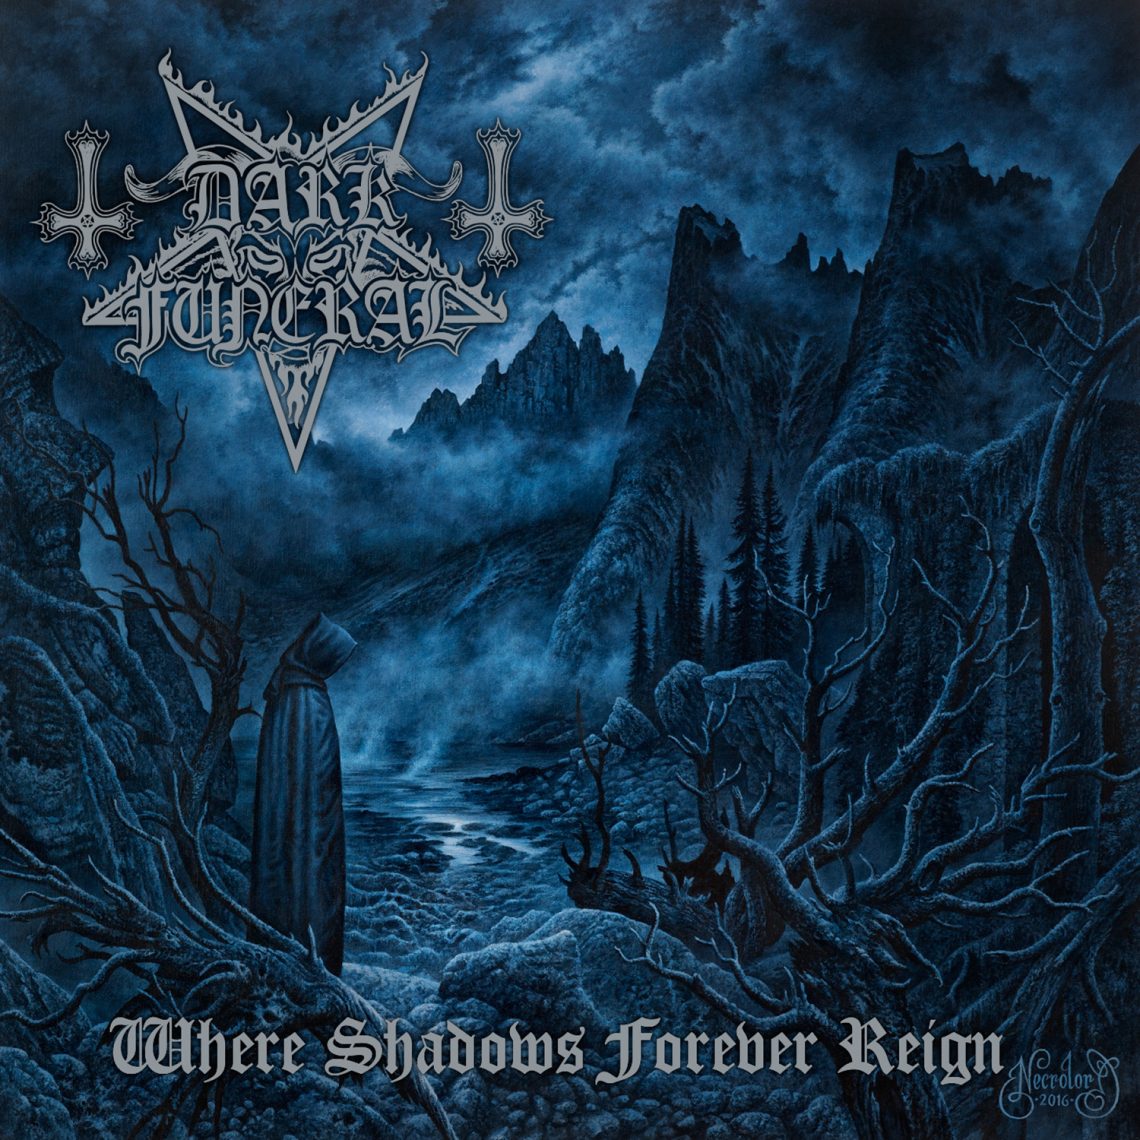 Dark Funeral – Where Shadows Forever Reign – CD Review